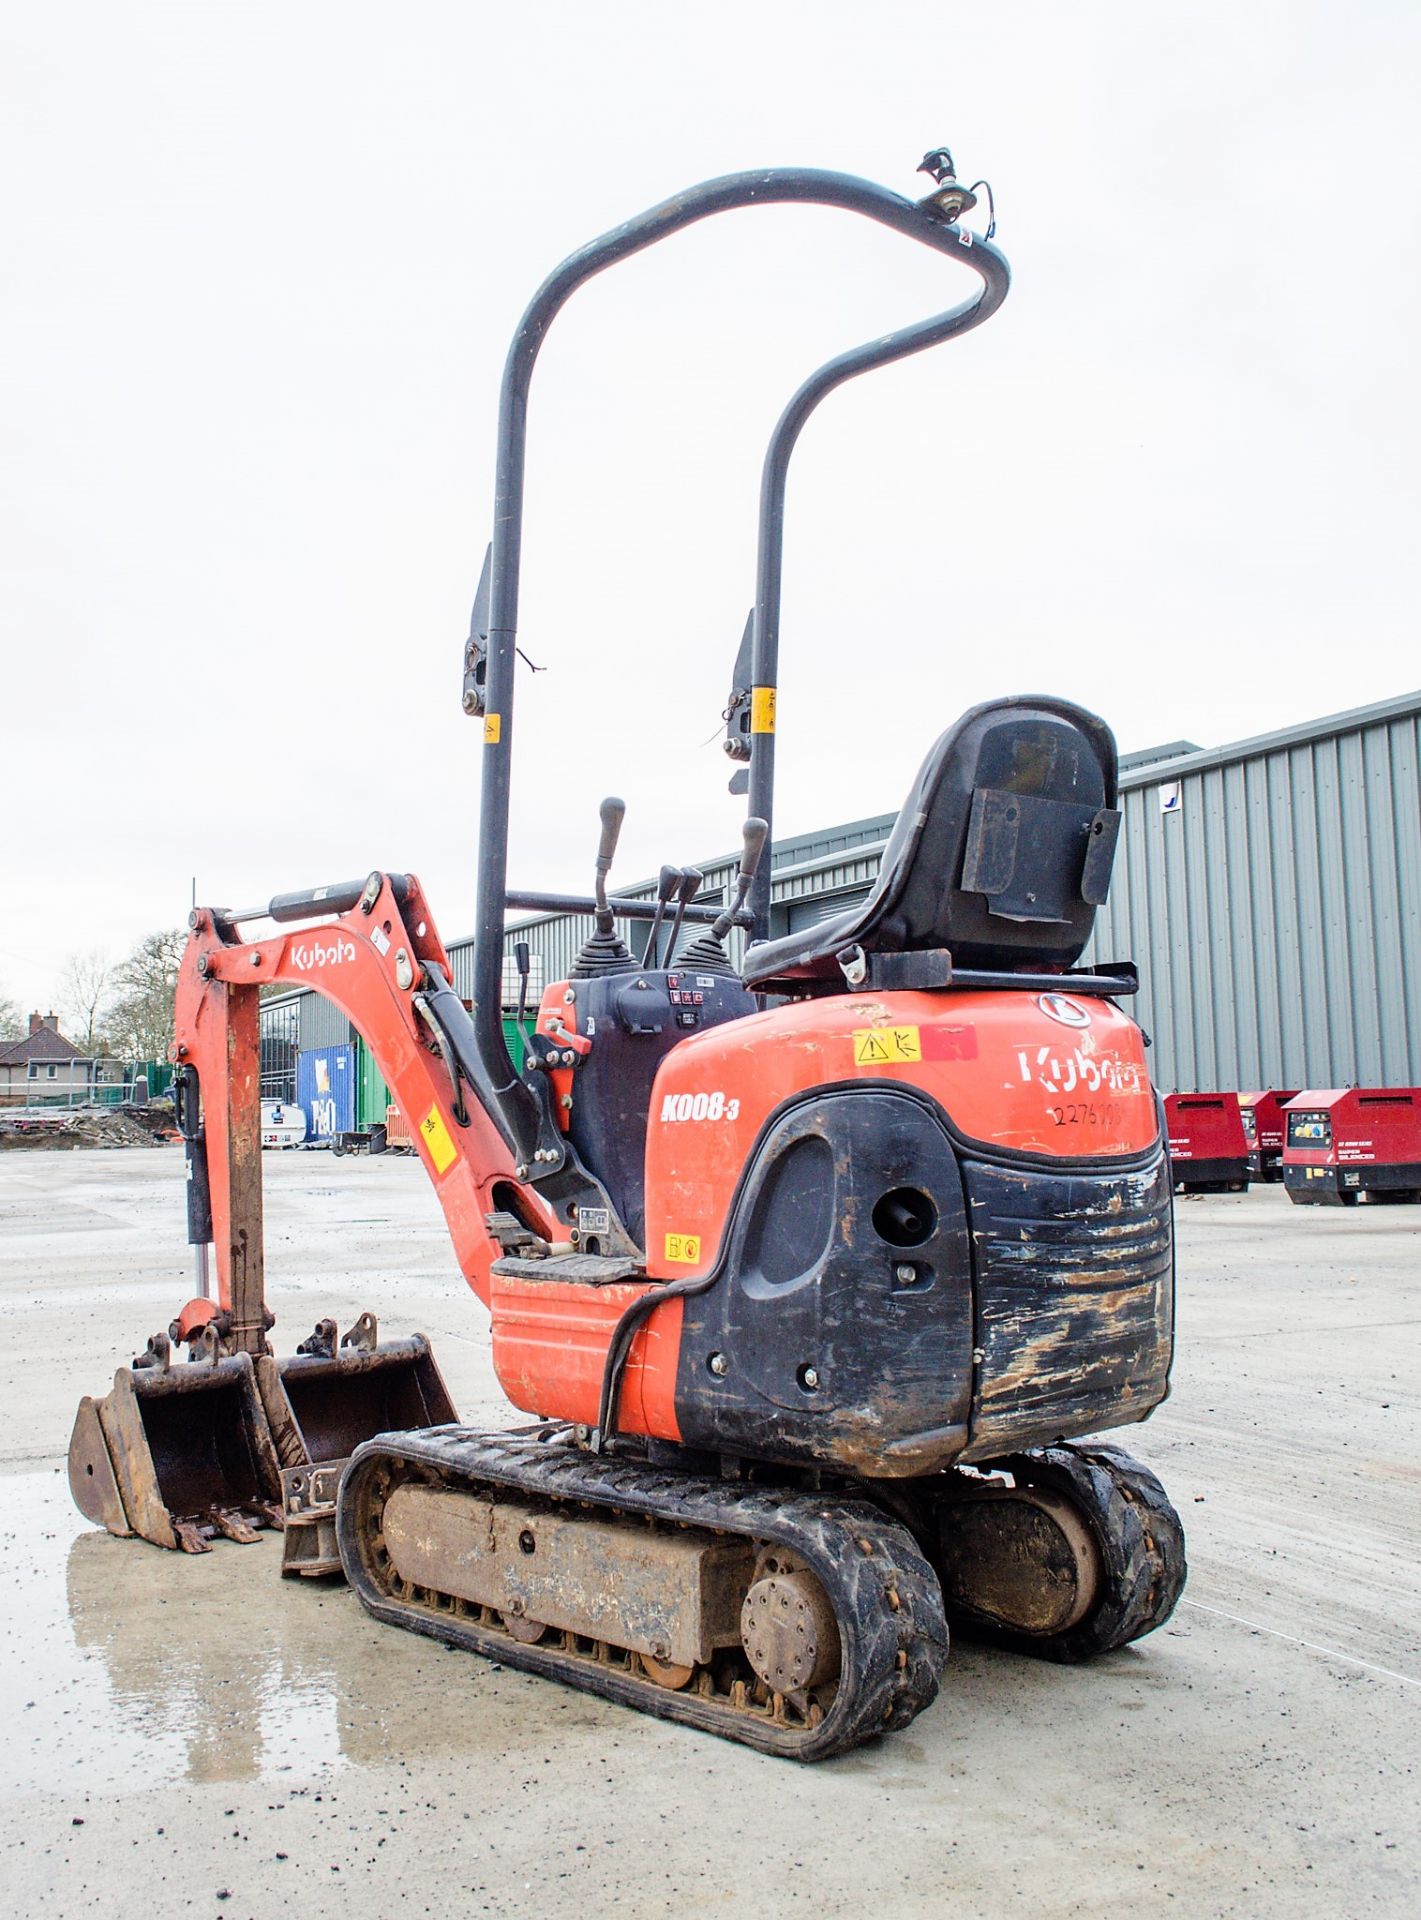 Kubota K008-3 0.8 tonne rubber tracked micro excavator Year: 2017 S/N: 29274 Recorded Hours: 1105 - Image 4 of 18